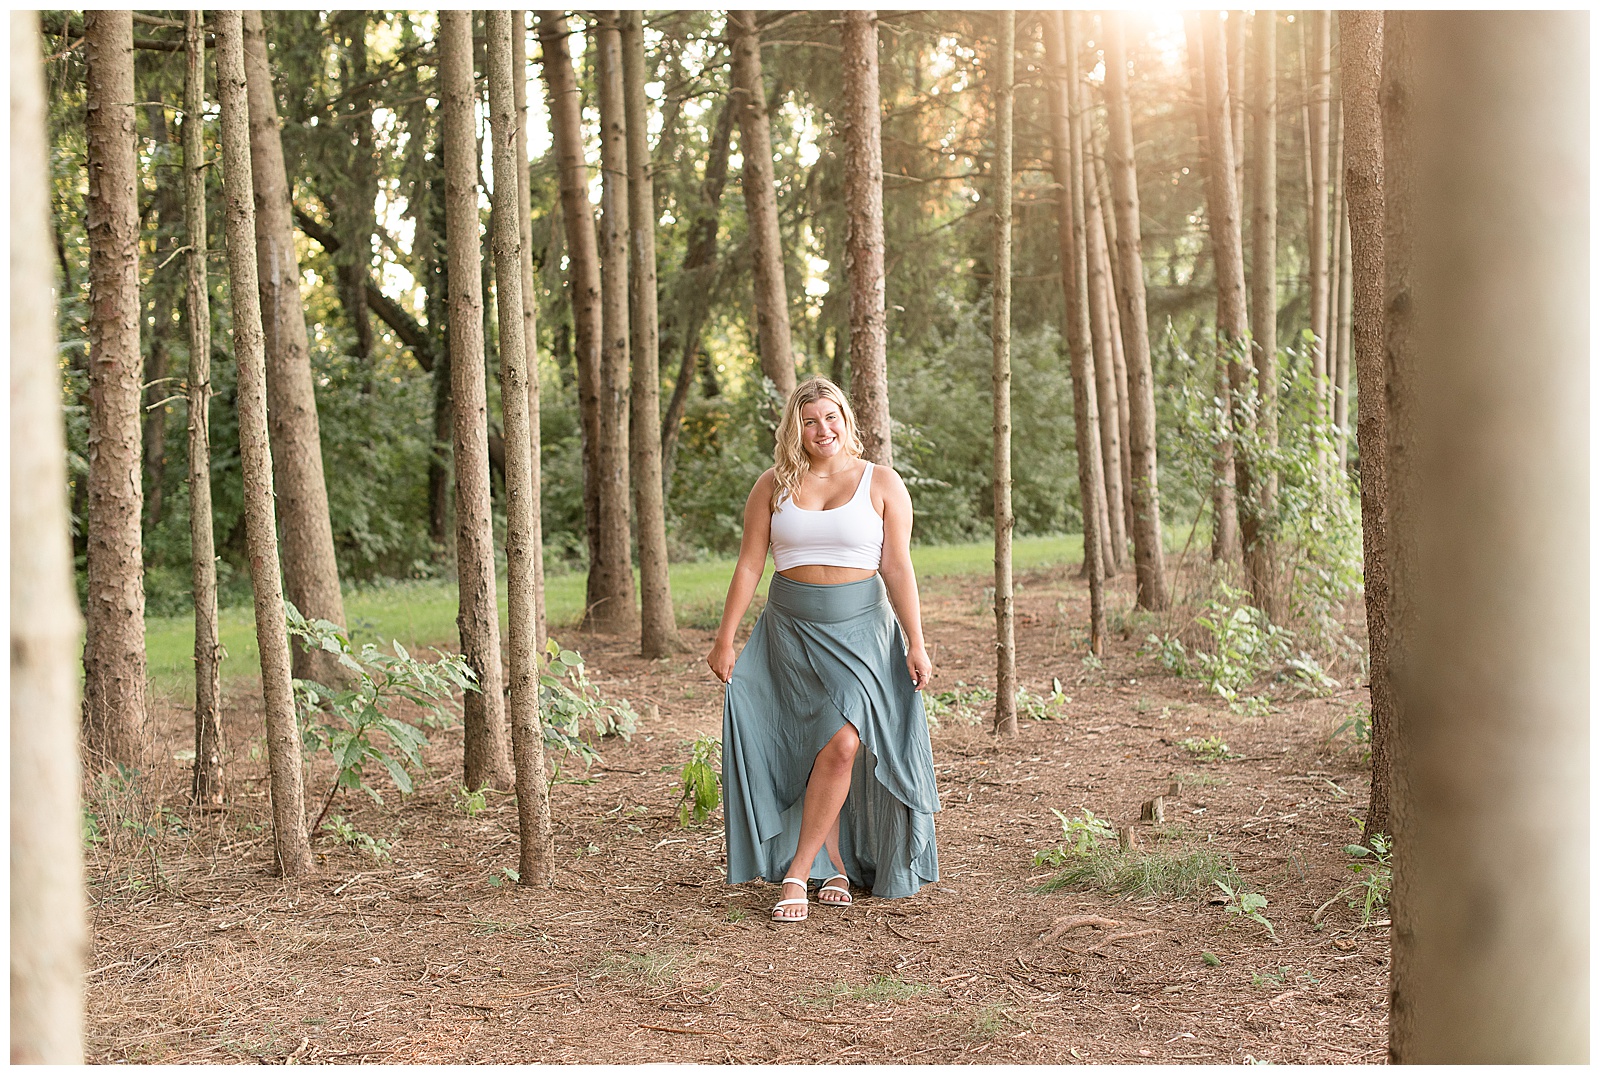 senior walking on path surrounded by pine trees holding skirt with both hands